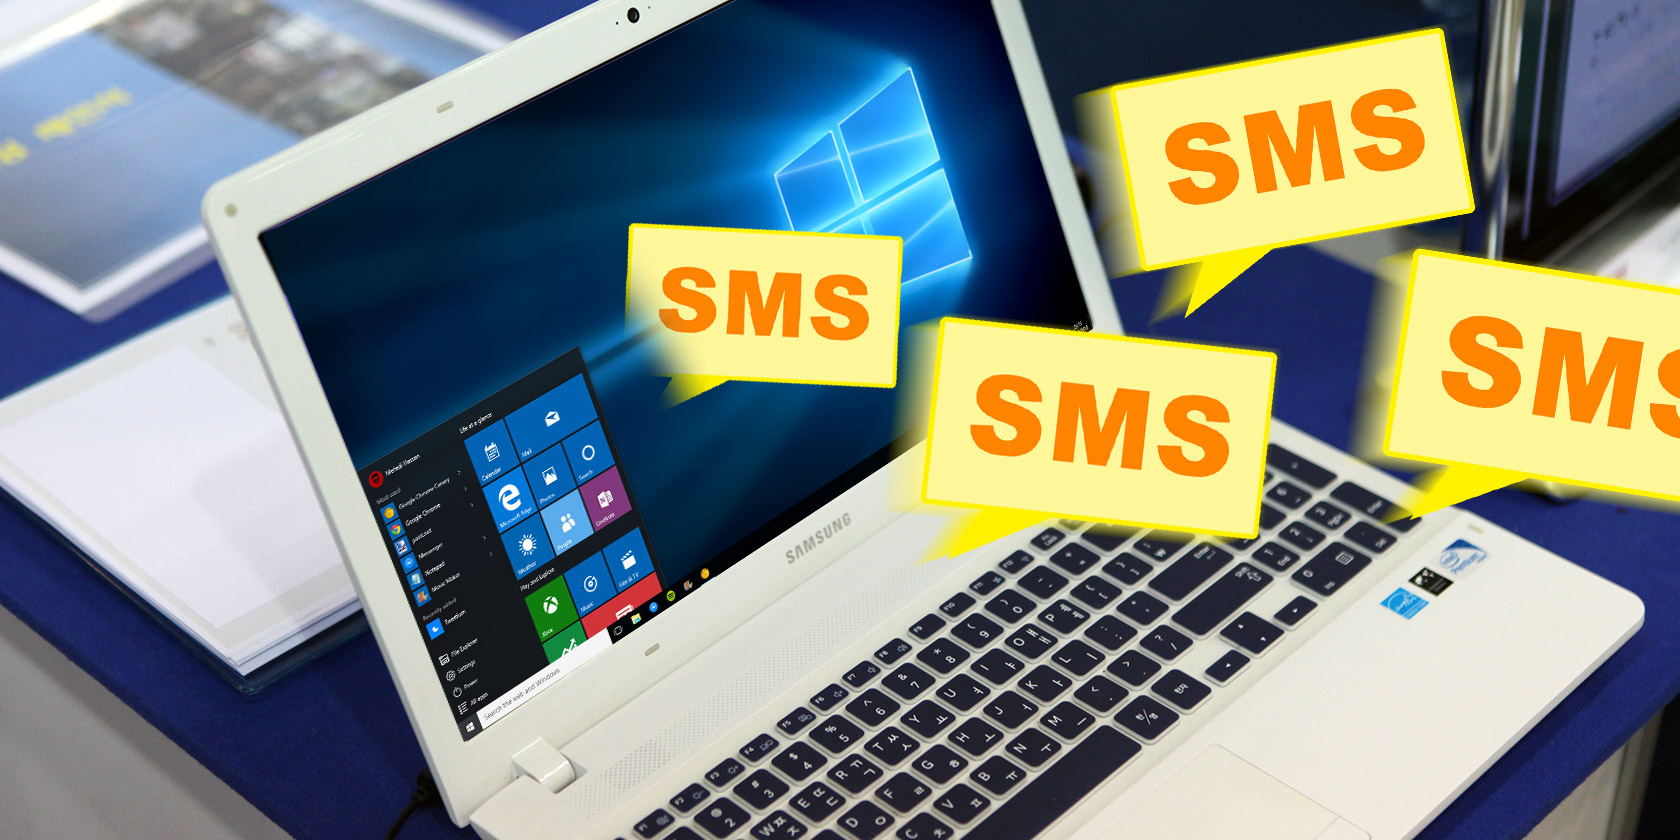 How can I send free SMS from my computer?